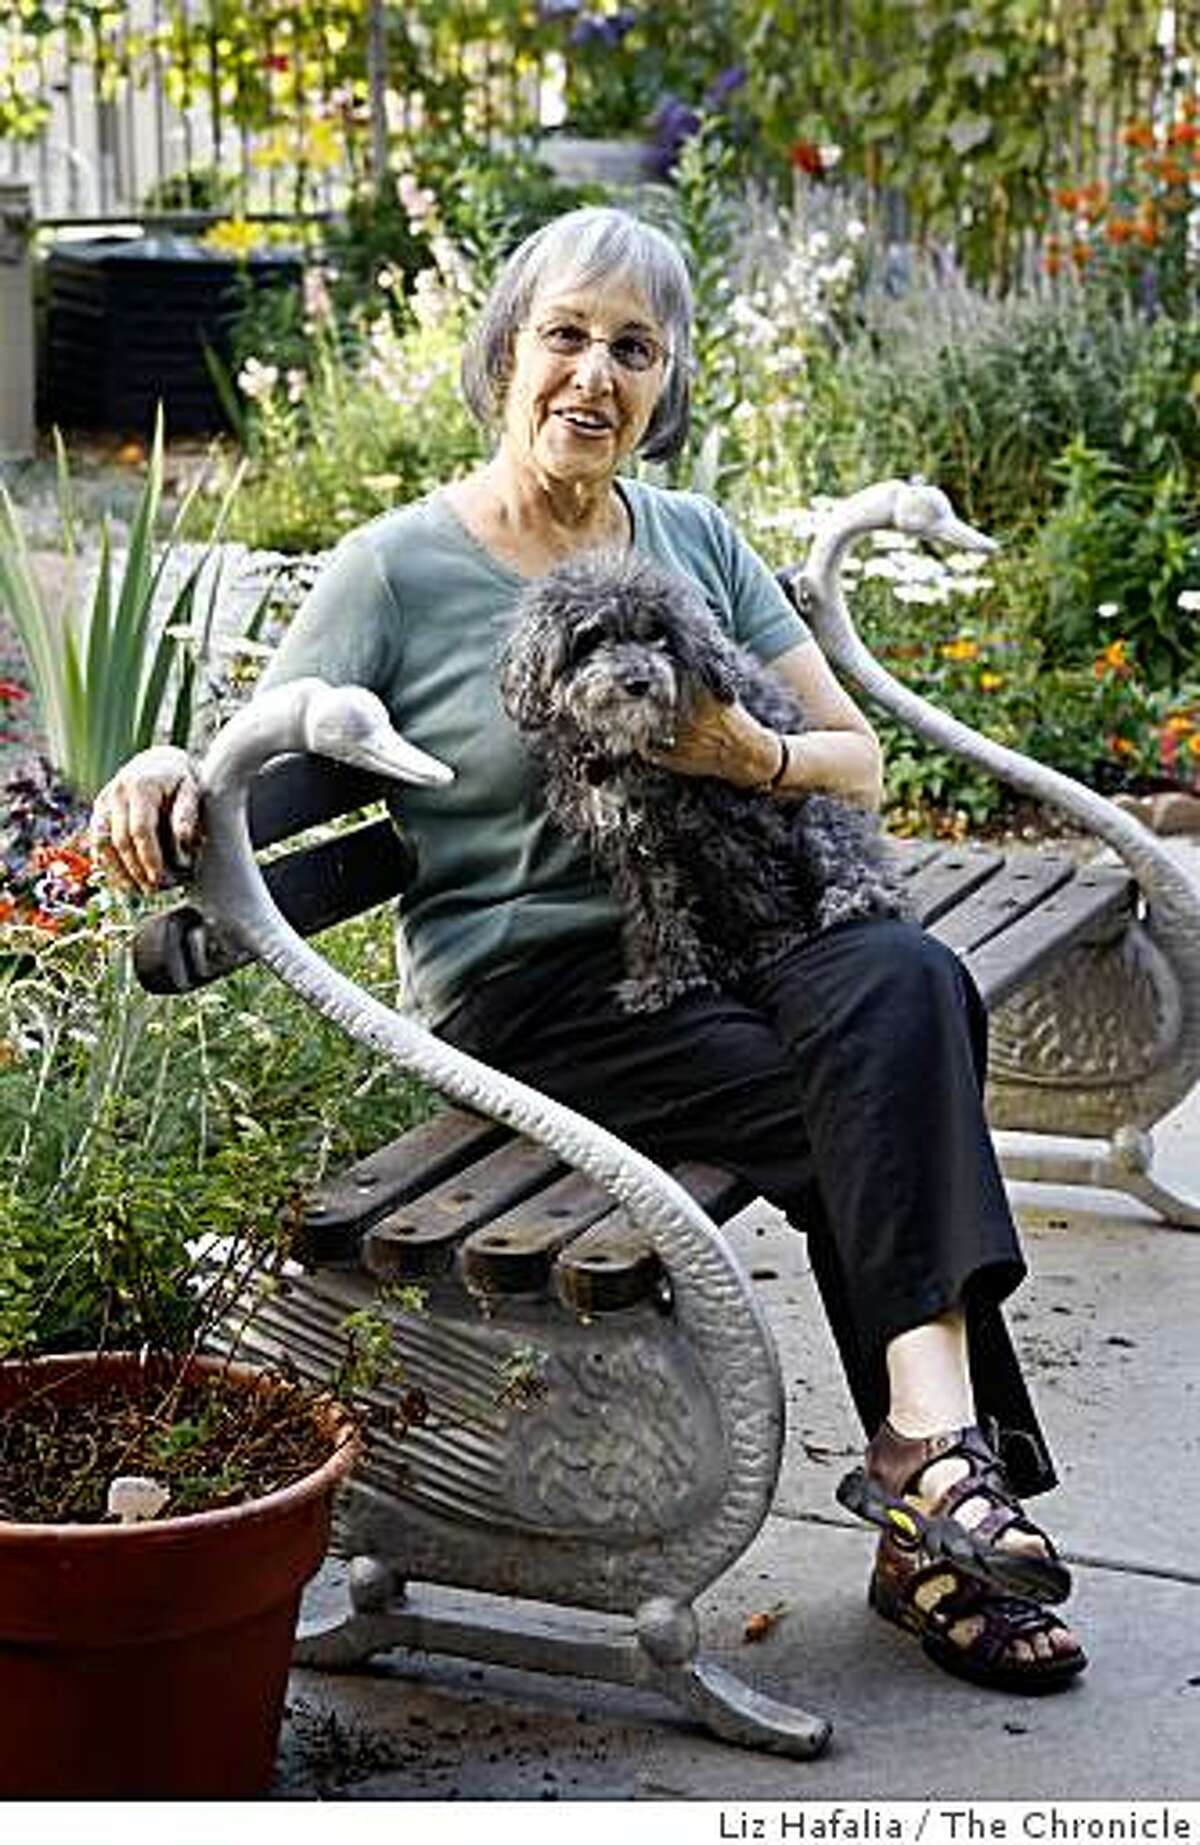 Joani Blank, who was the founder of Good Vibrations, is seen in a July 2, 2009 photo in Oakland. She is with her poodle, Bapu-Ji. Blank died over the weekend.